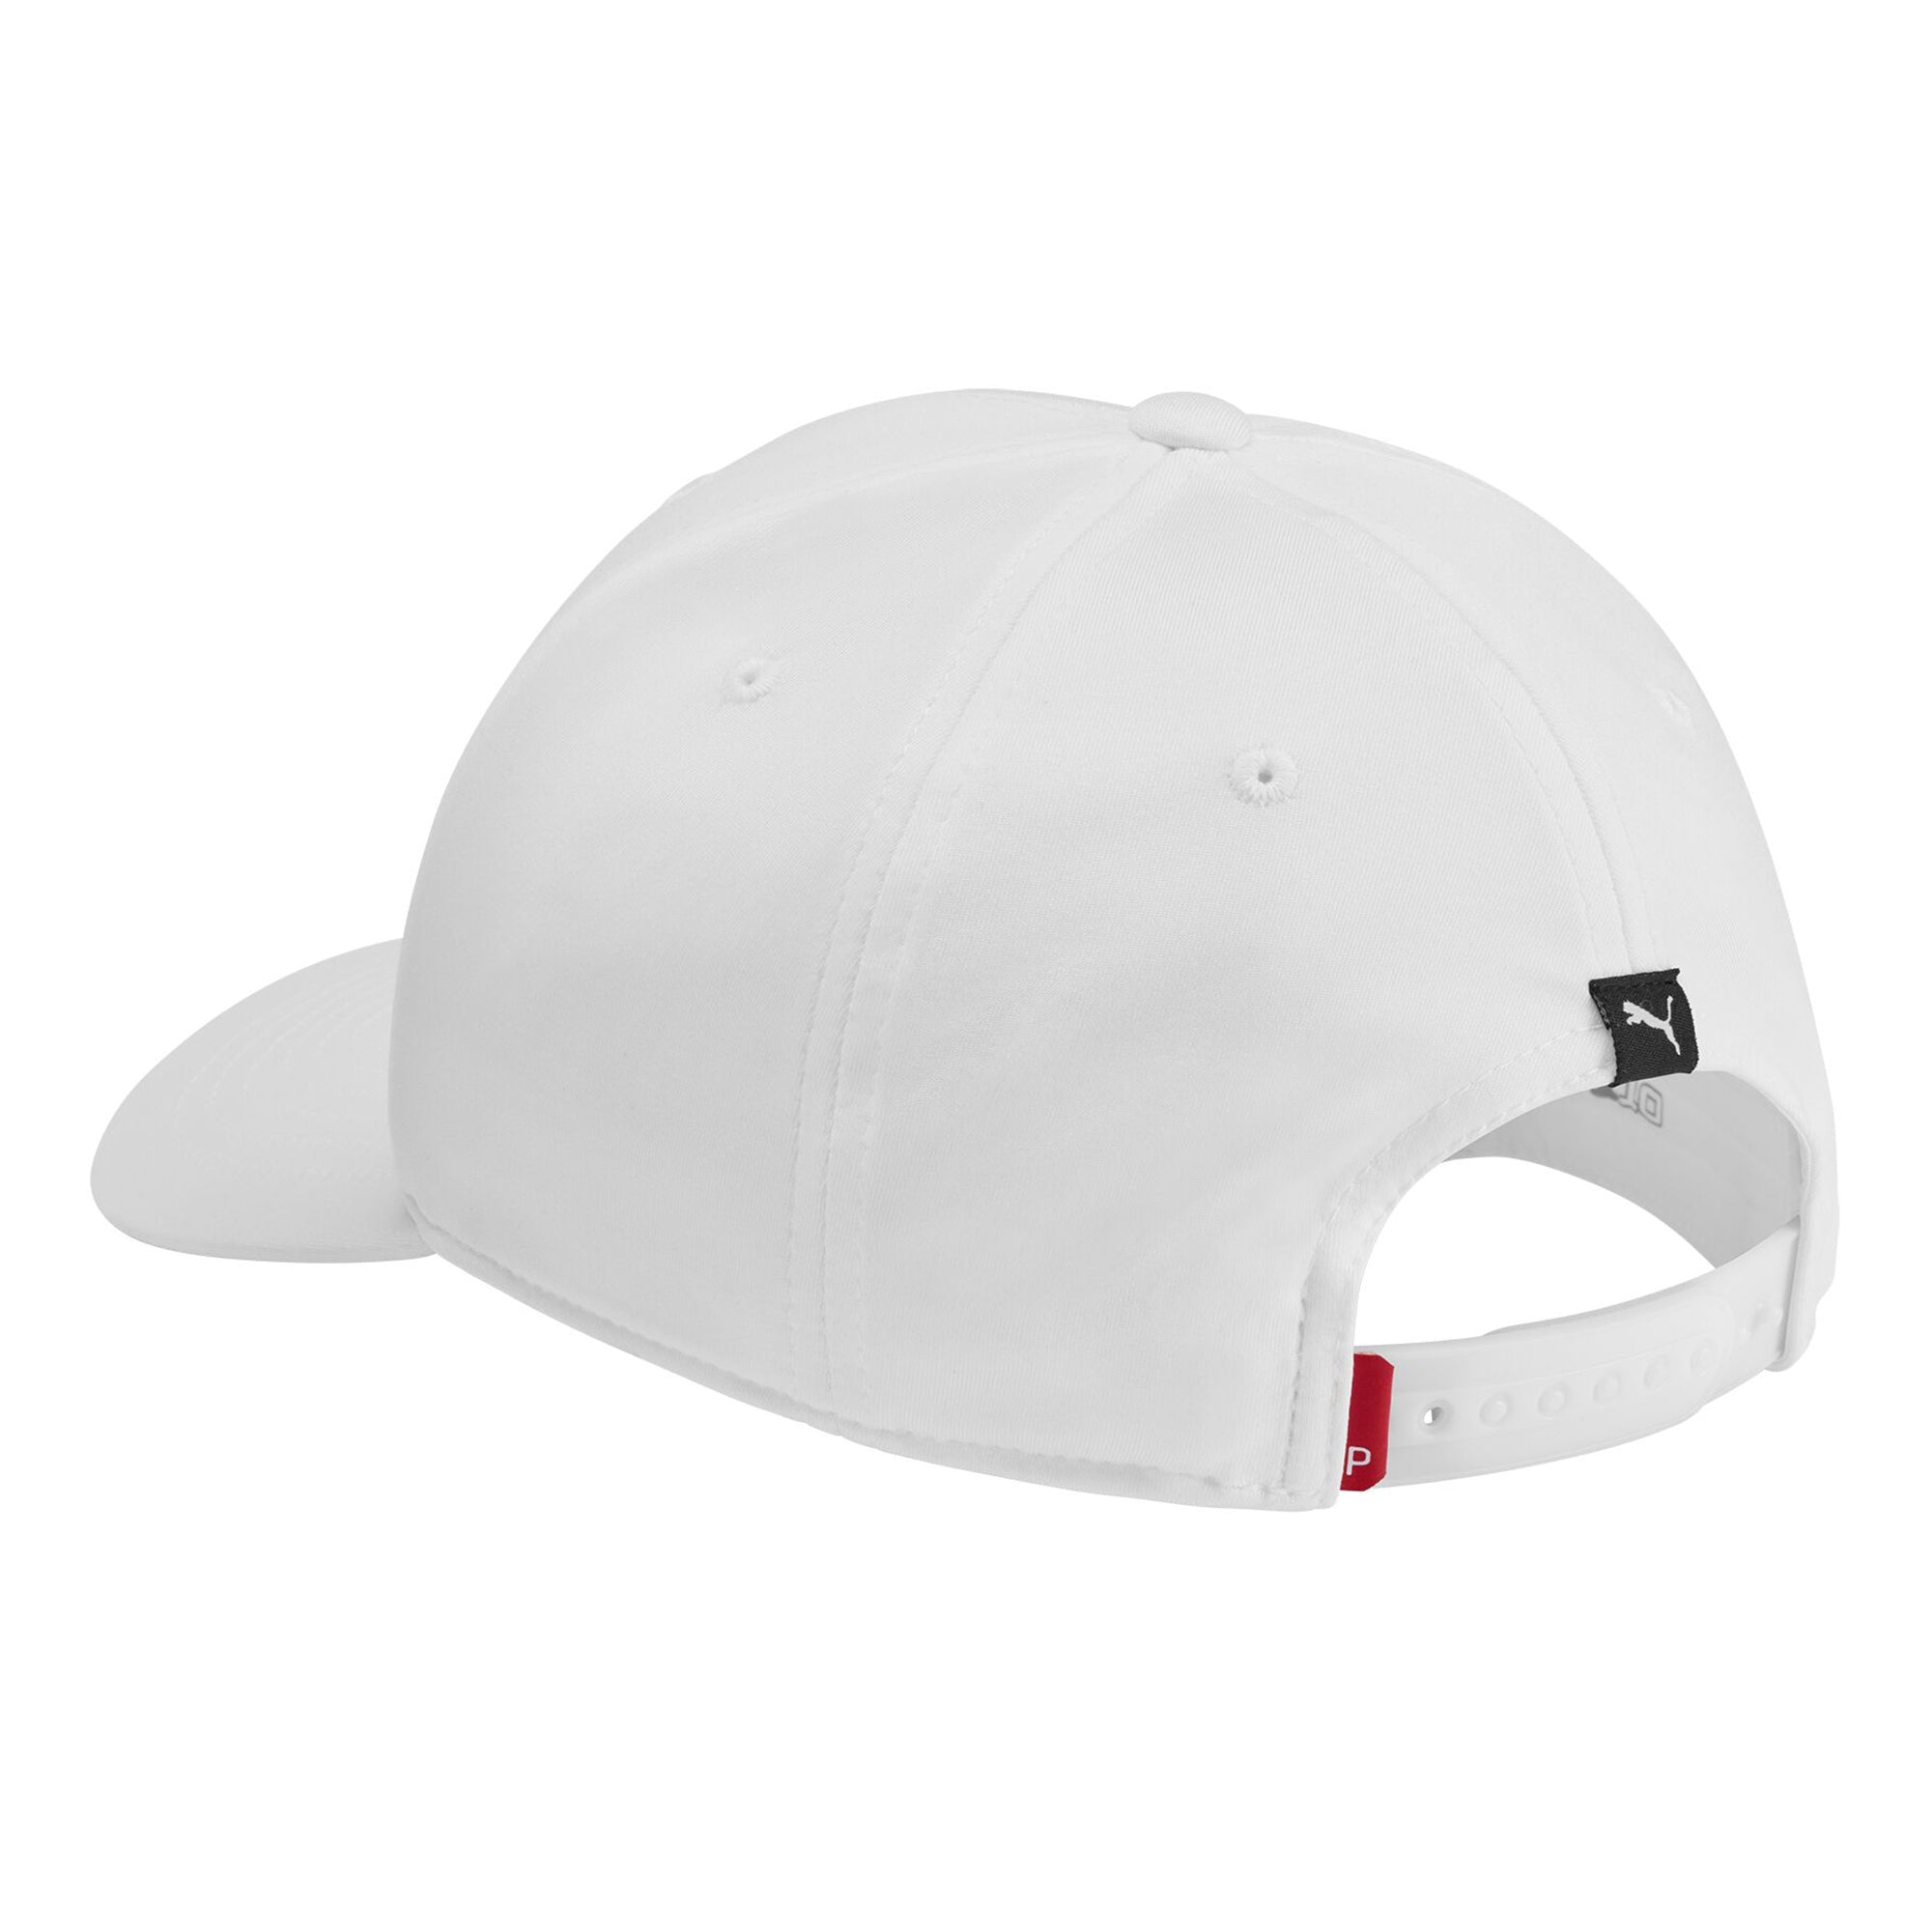 Puma Golf x Hoops Tourney Cap 025079 White Glow Clyde Royal 01 | Function18